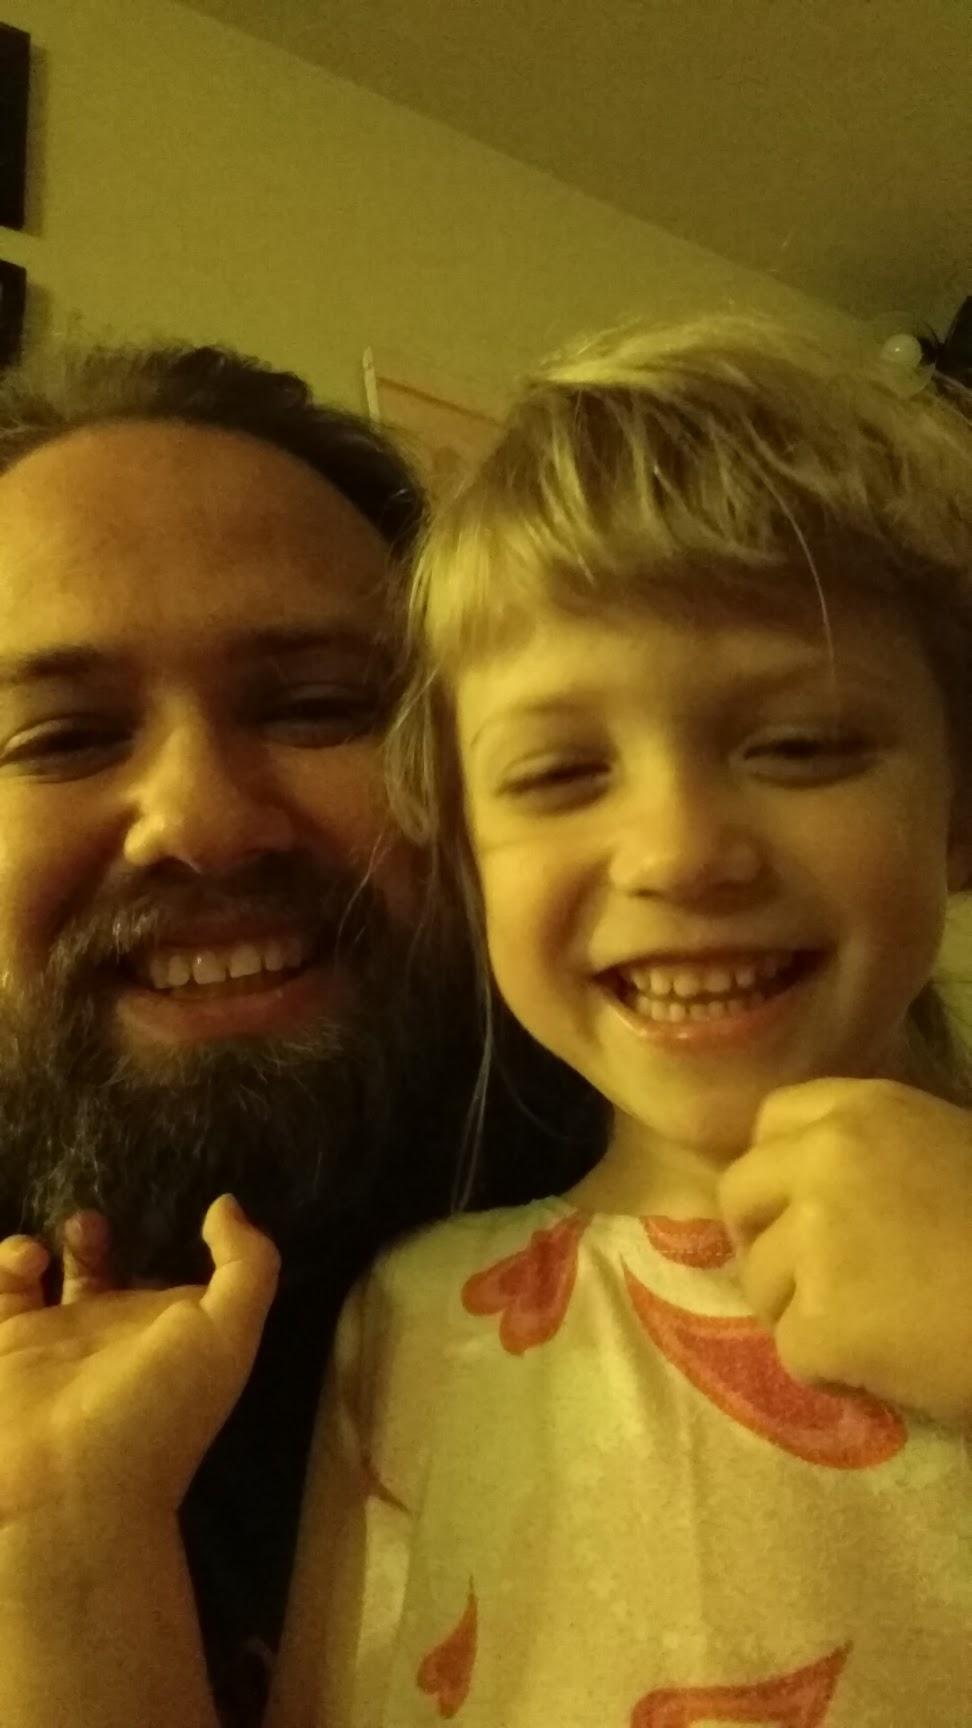 Selfie of two people: a bearded man in his thirties, and a five year old girl. Both are smiling brightly.